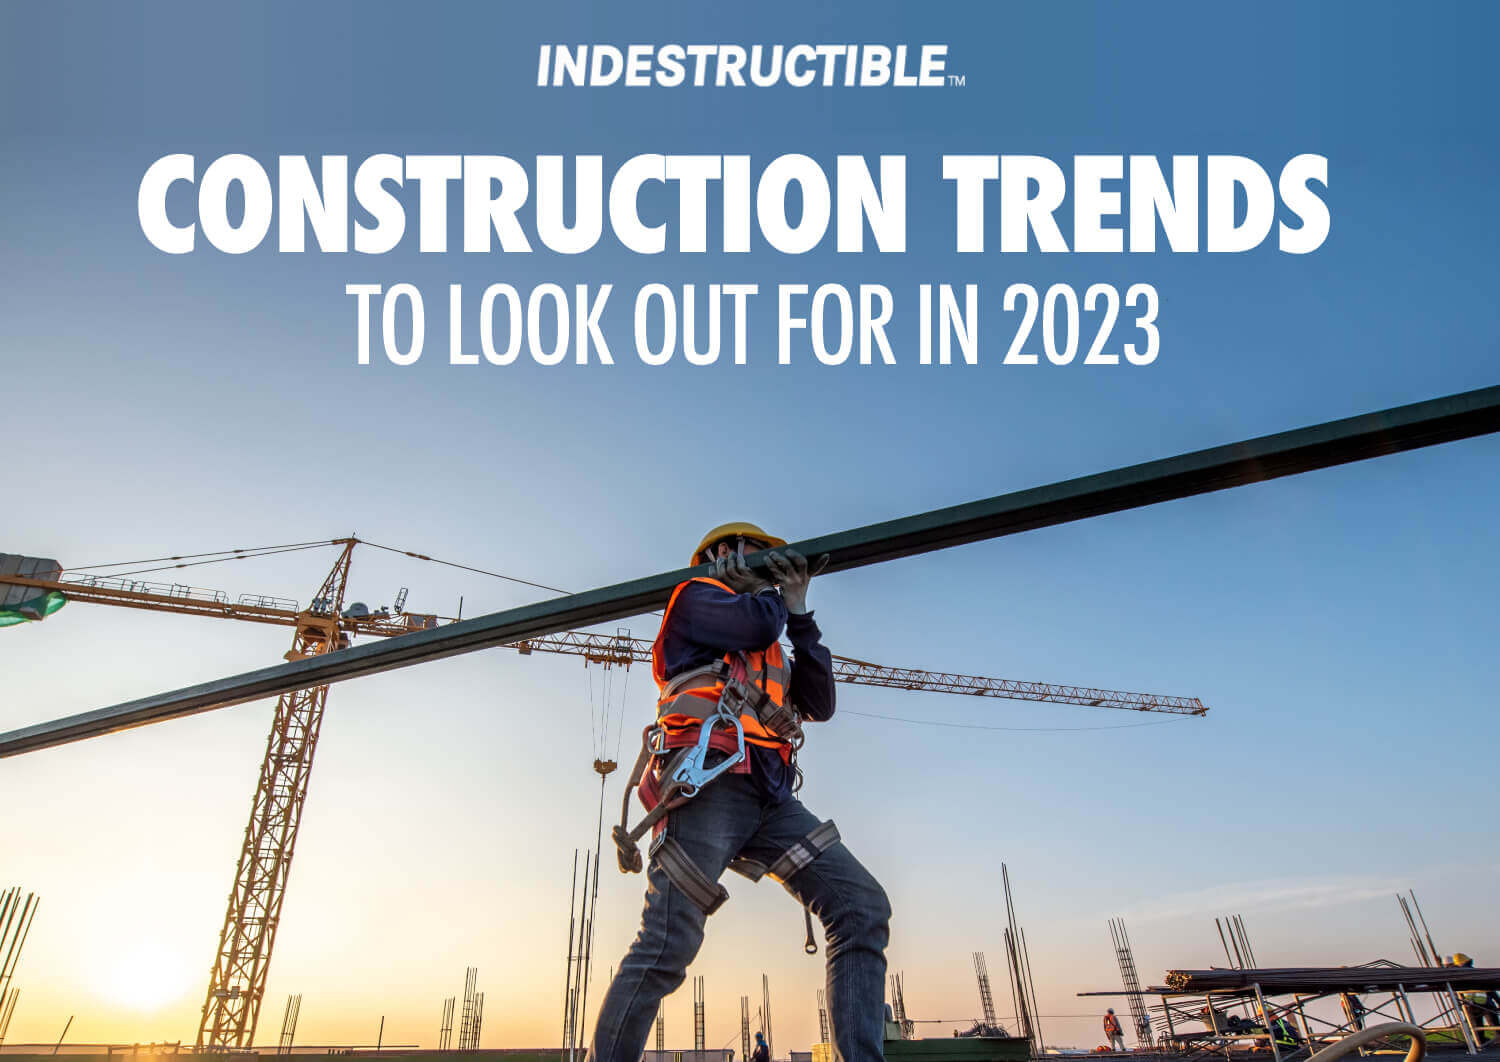 2023 Construction TRENDS!